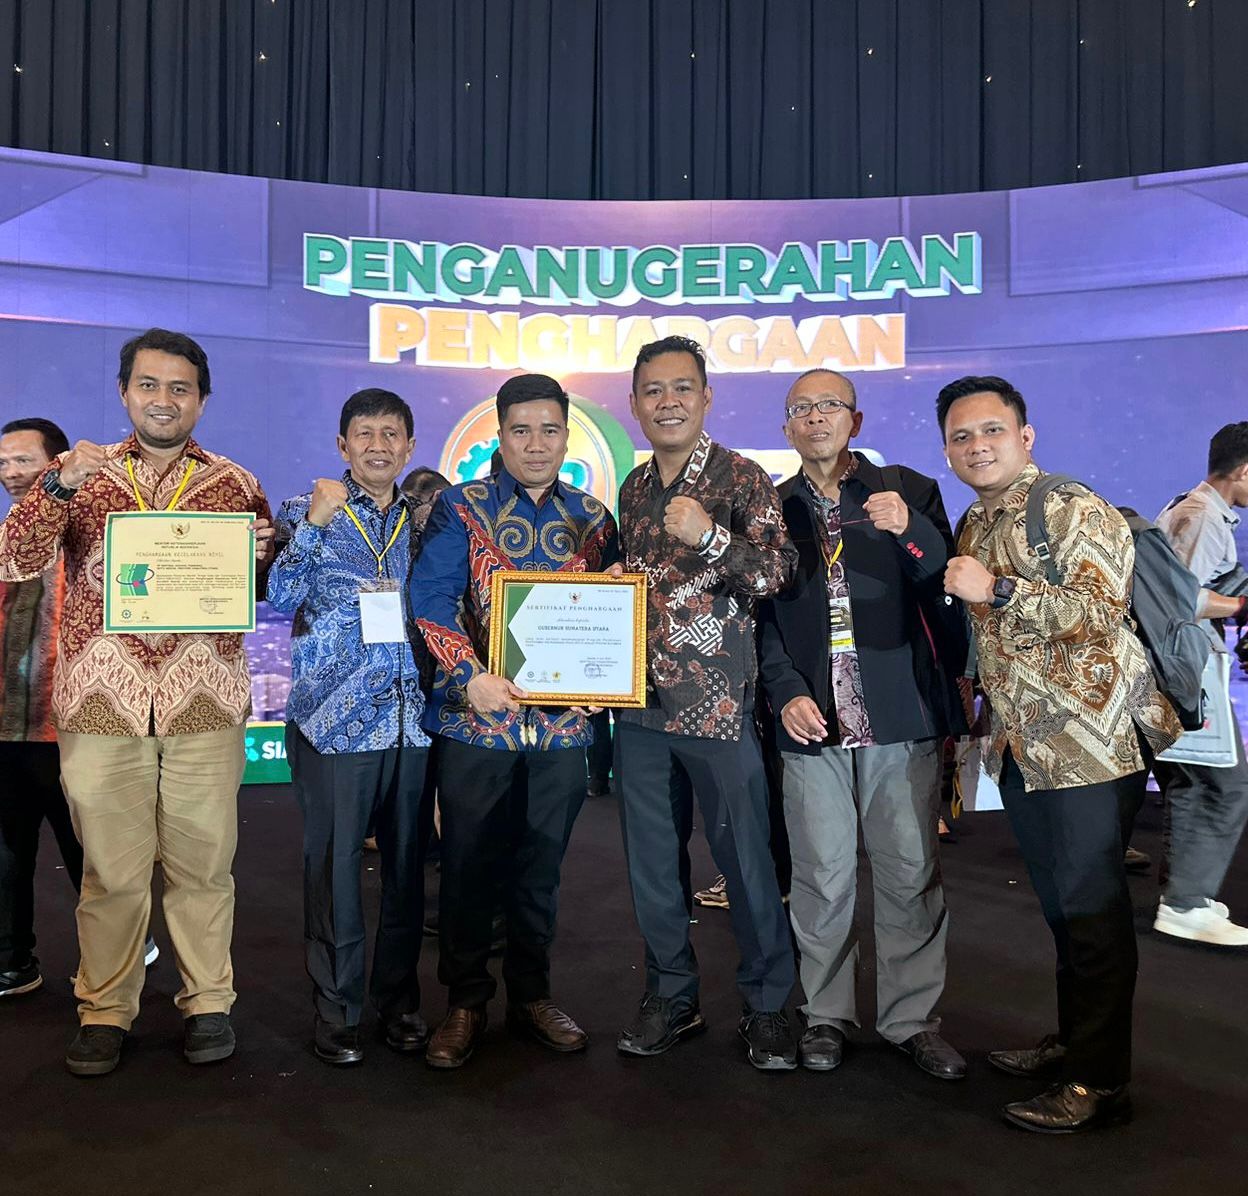 Sentral Gudang Terminal 3 and FKS Multi Agro, Medan Have Zero Accident Award From the Indonesian Ministry of Labour